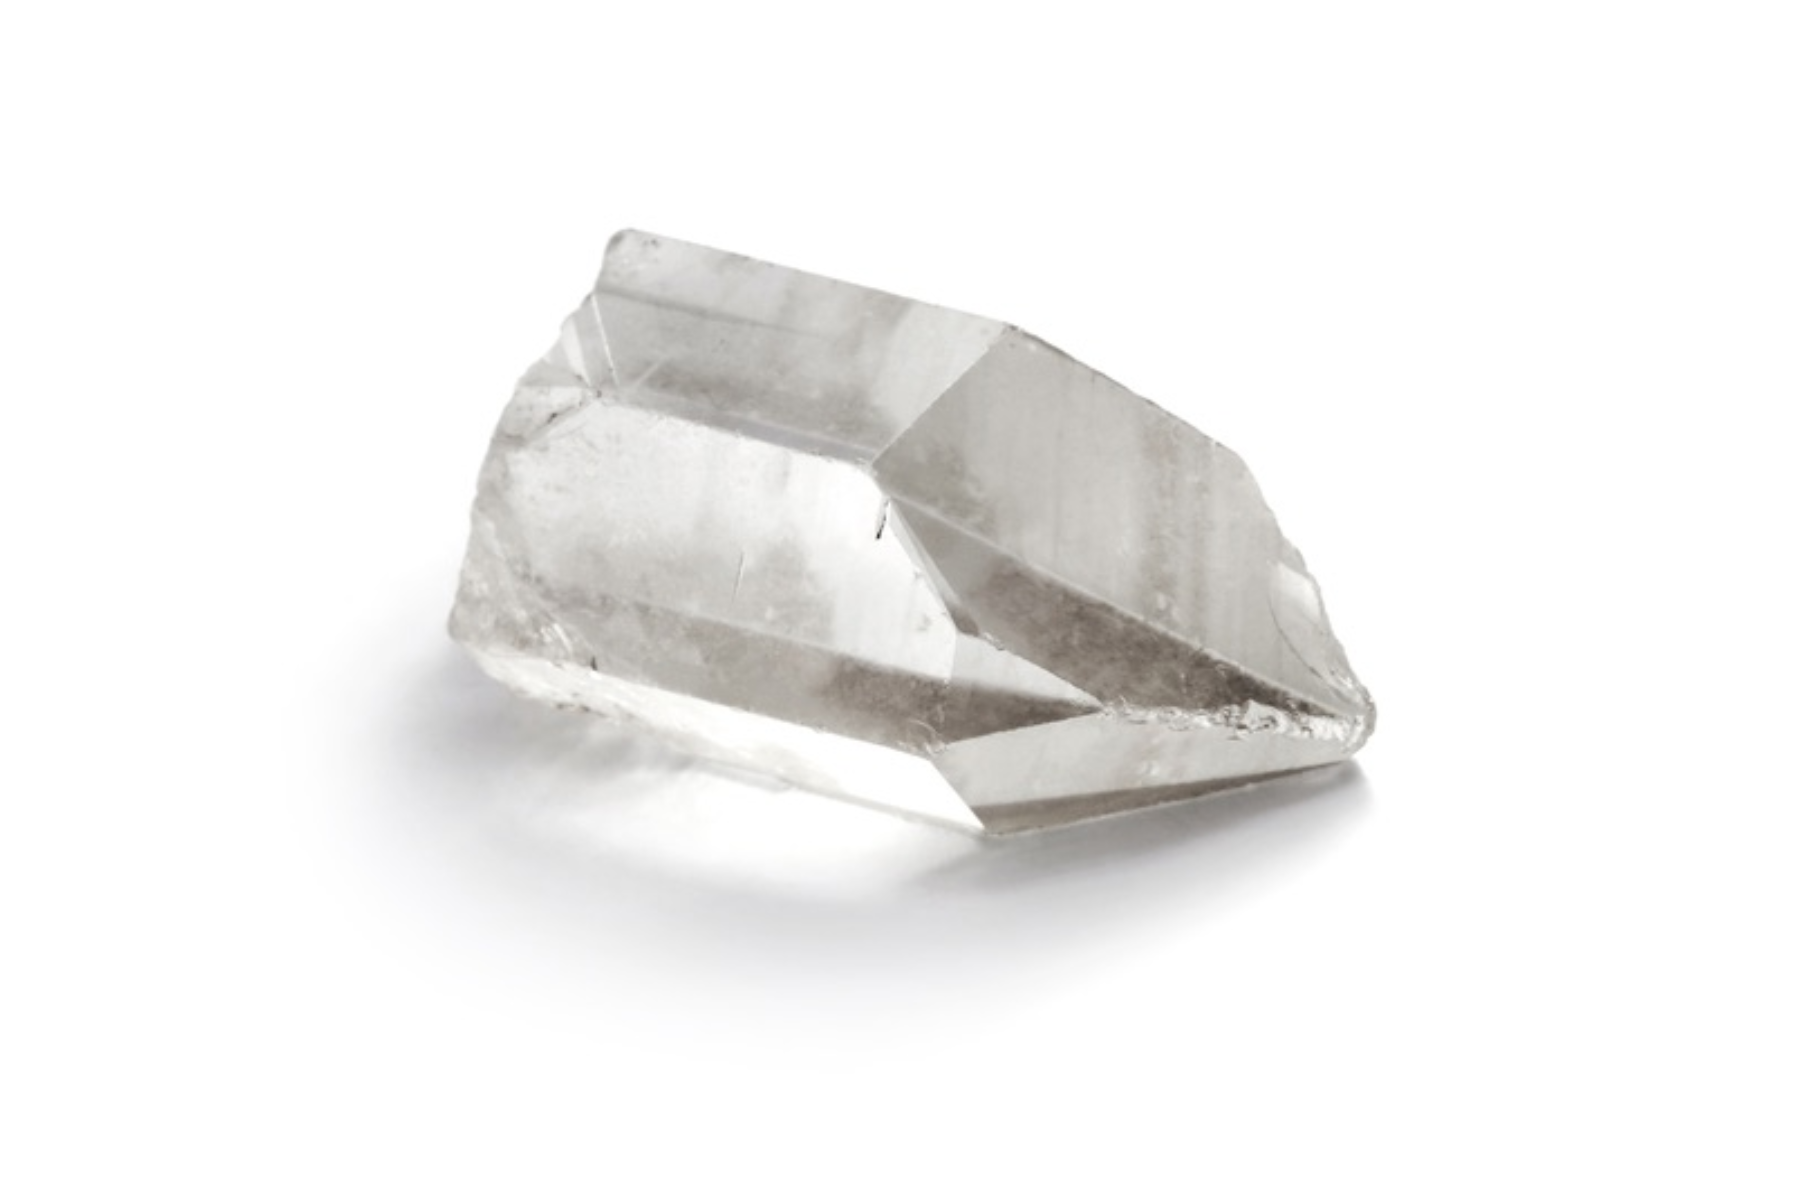 A pointed clear quartz crystal that is transparent and clear